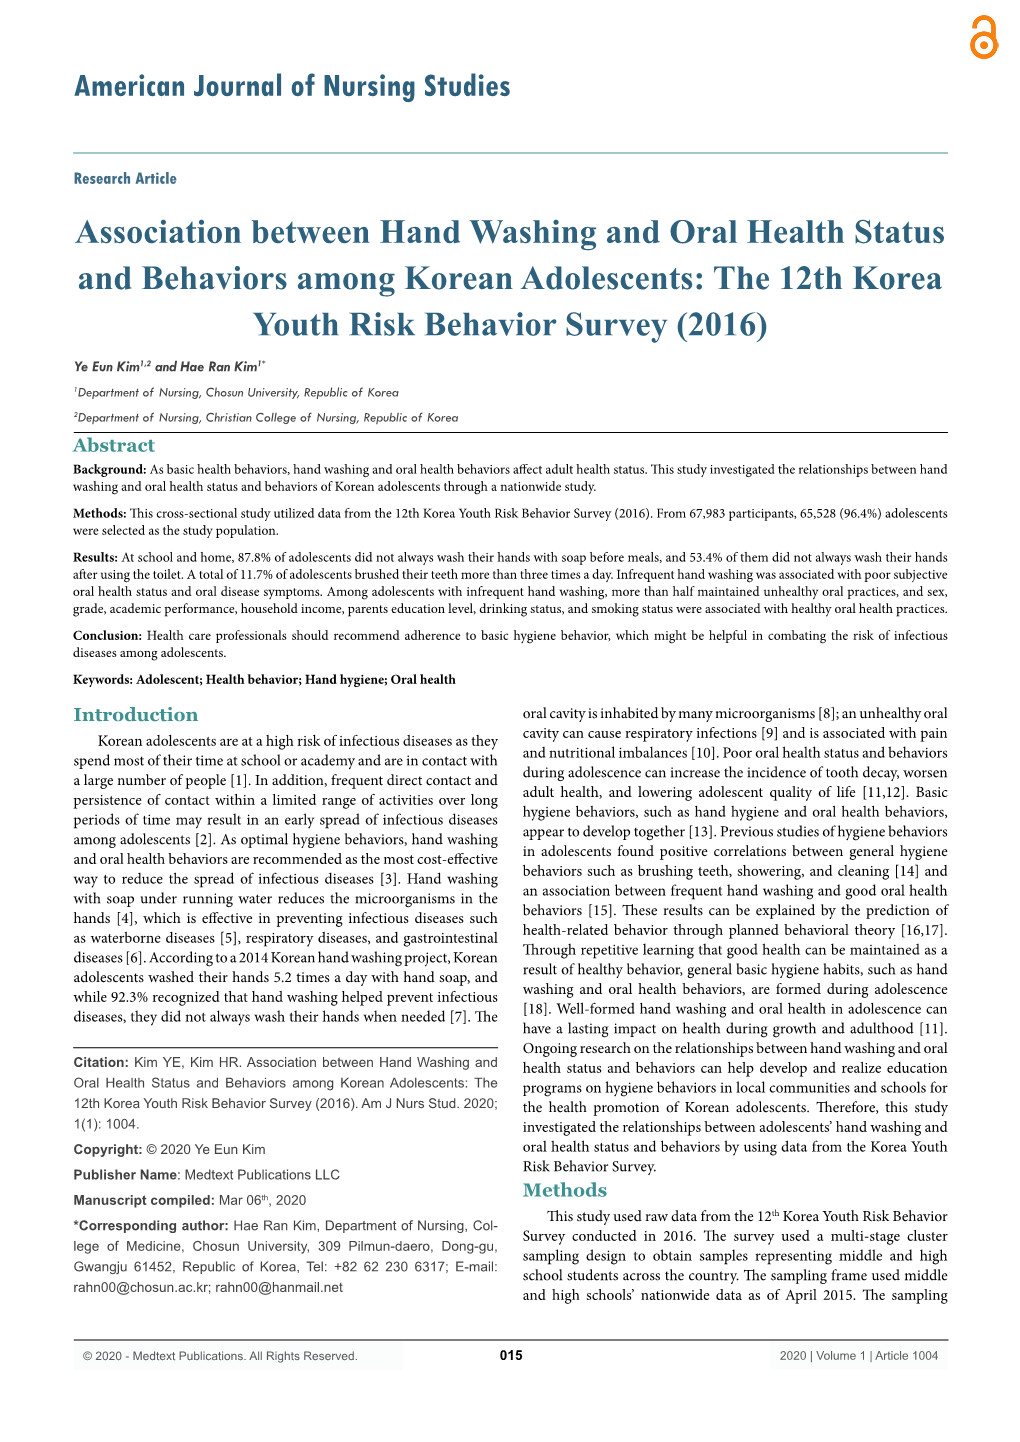 Association Between Hand Washing and Oral Health Status And